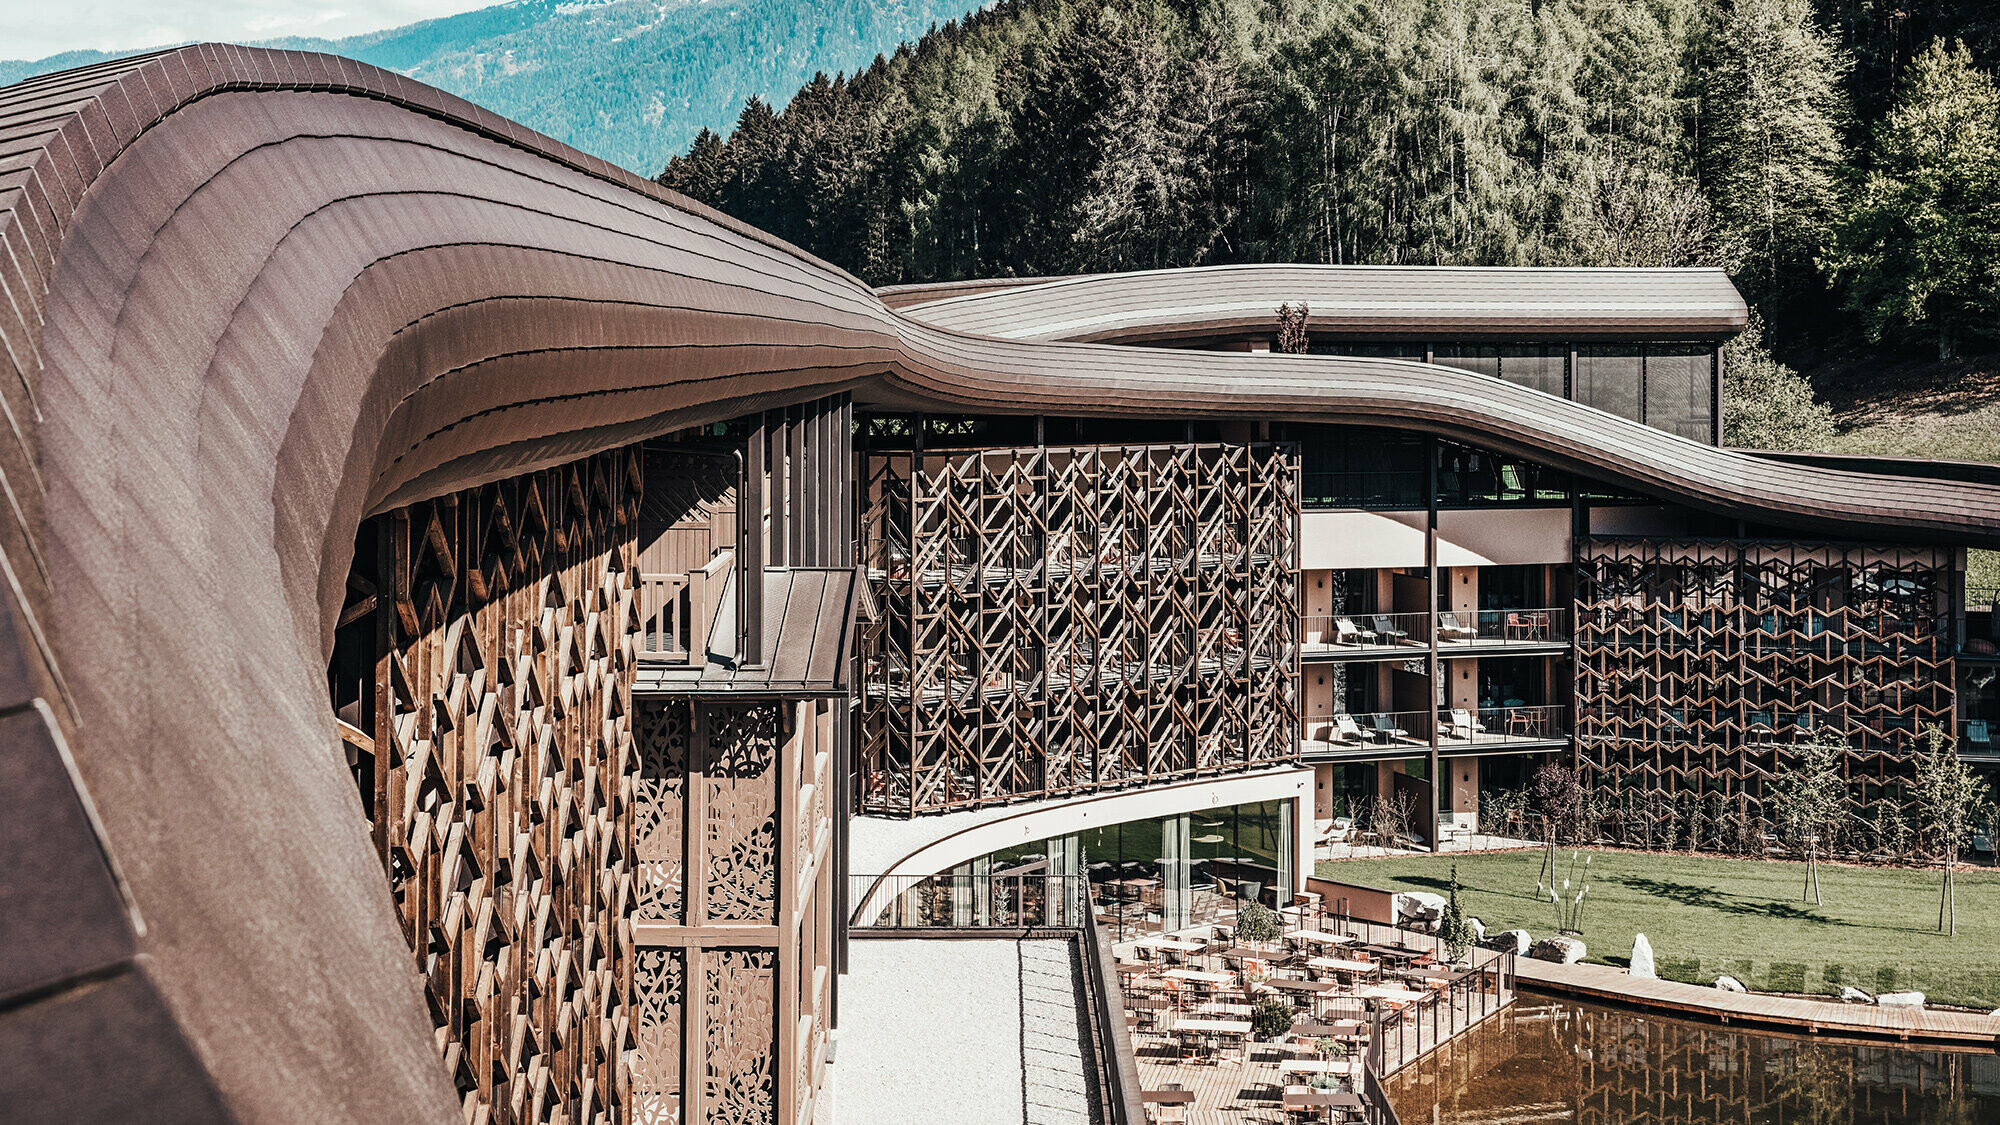 The roof wave in detail of the Falkensteiner Hotel in South Tyrol.